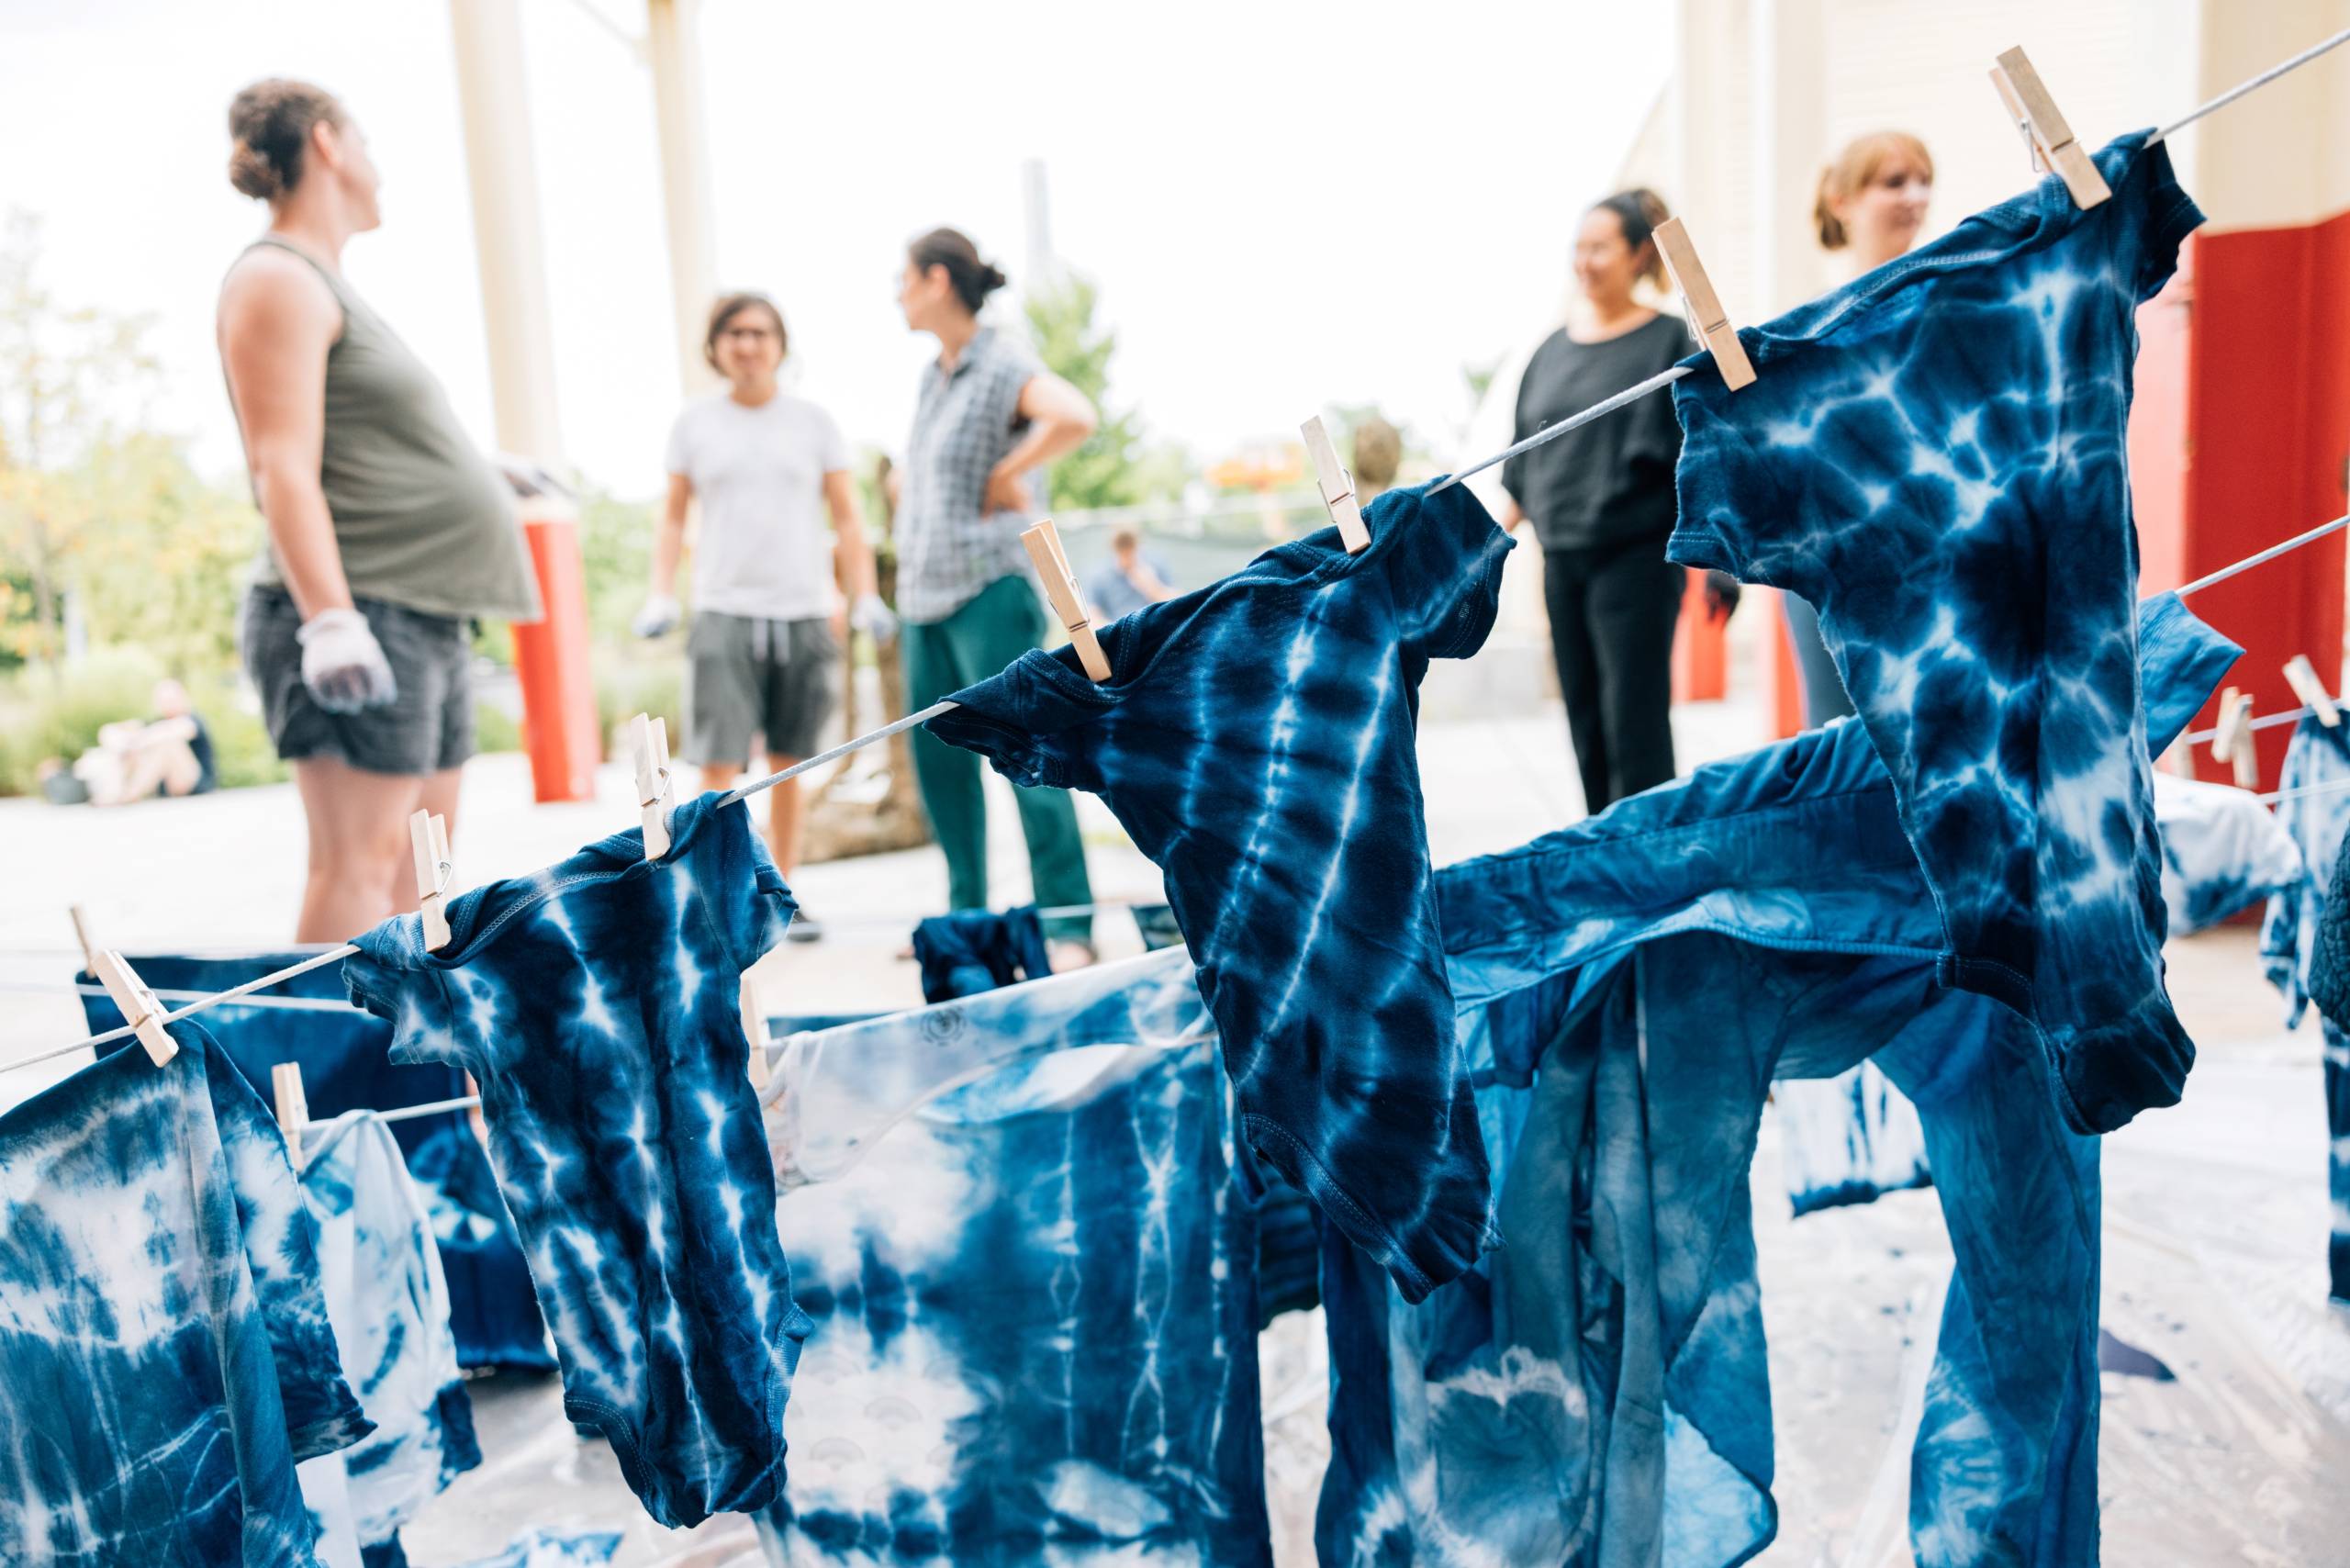 Freshly dyed clothing dries on a clothesline, while several people talk happily in the background